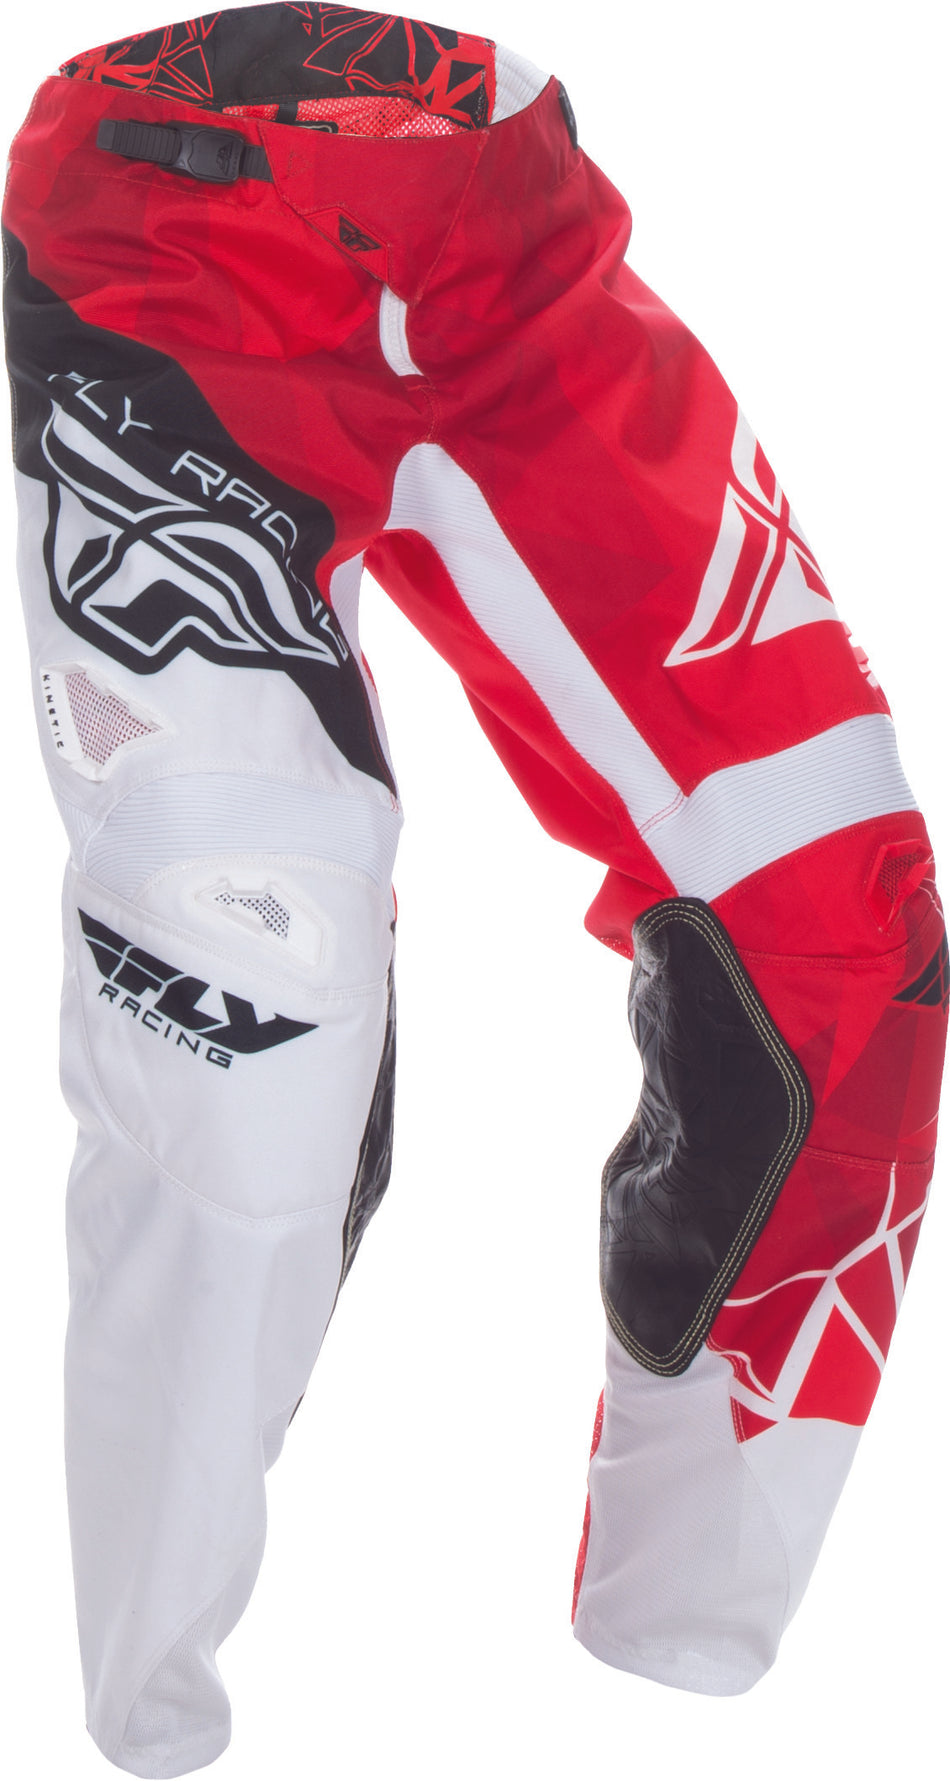 FLY RACING Kinetic Crux Pant Red/White Sz 40 370-53240